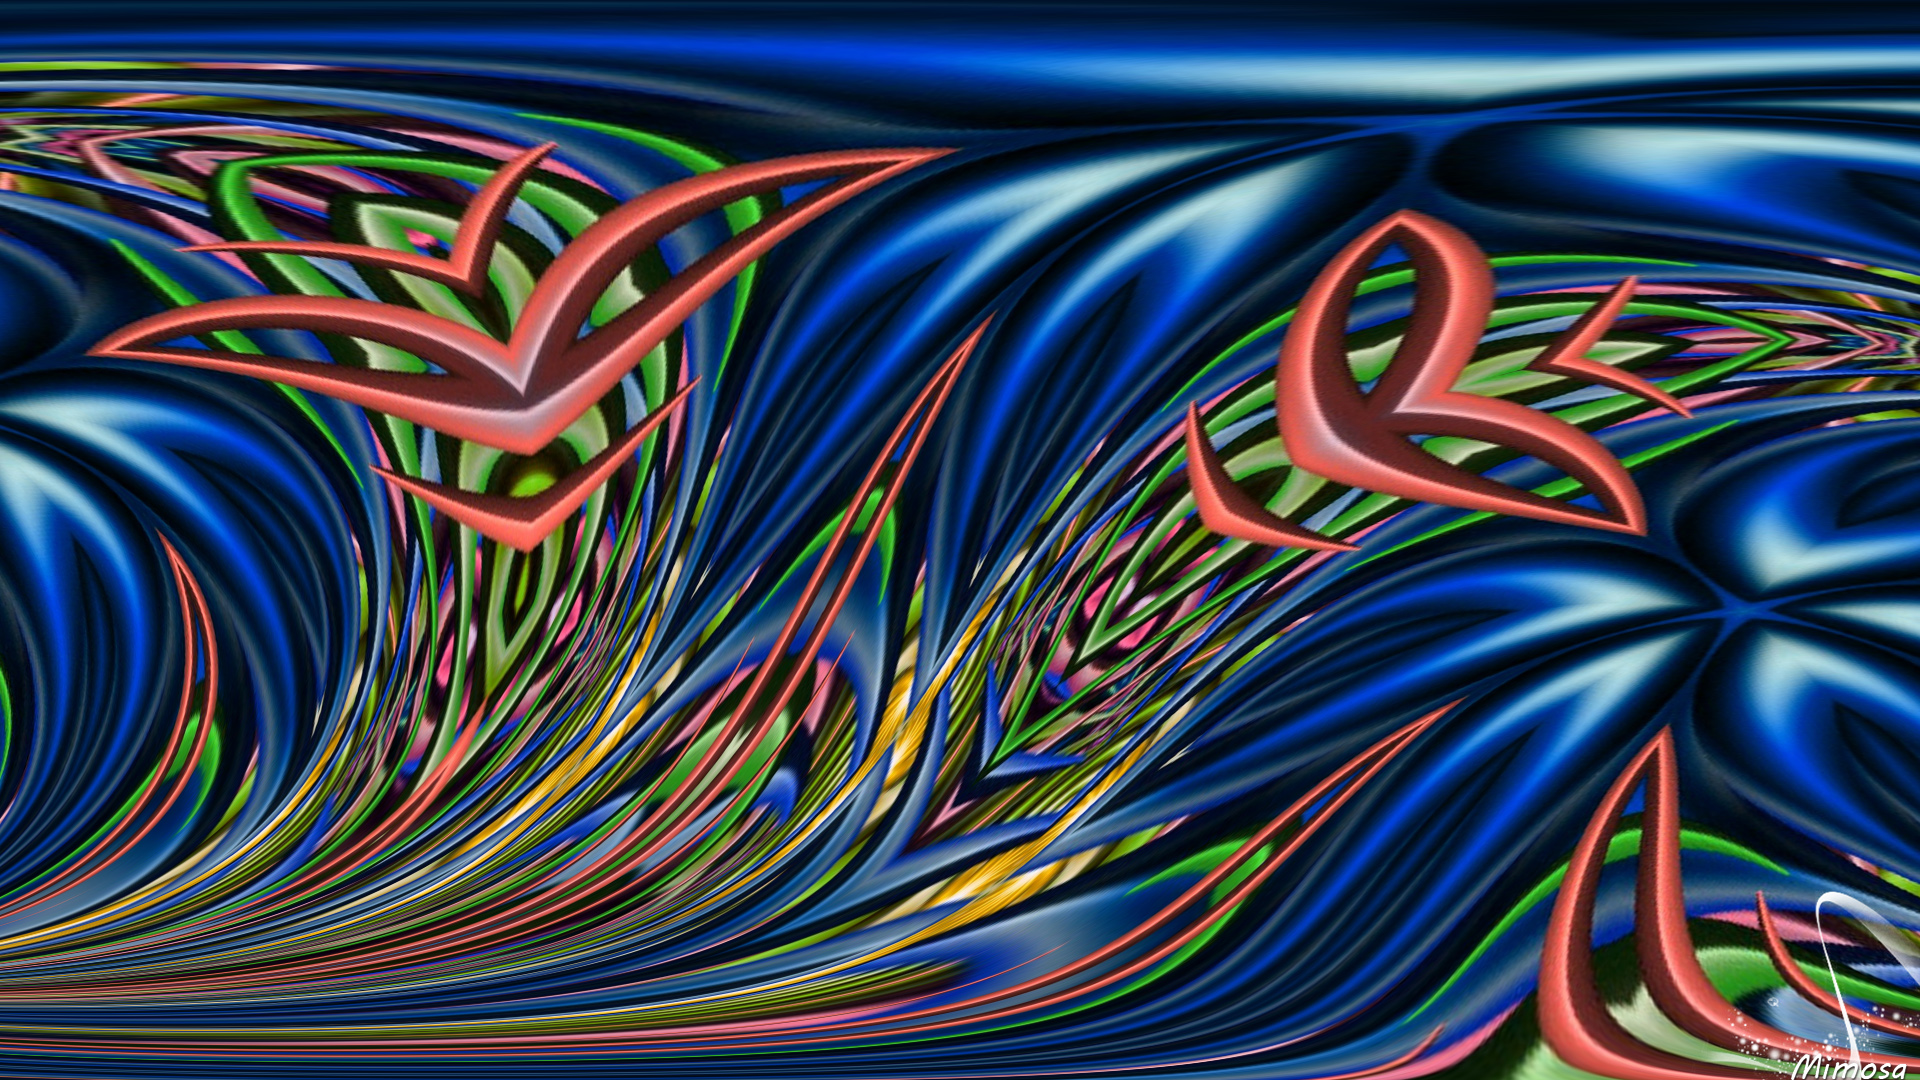 Abstract Colorful Digital Art Shapes Wave 1920x1080